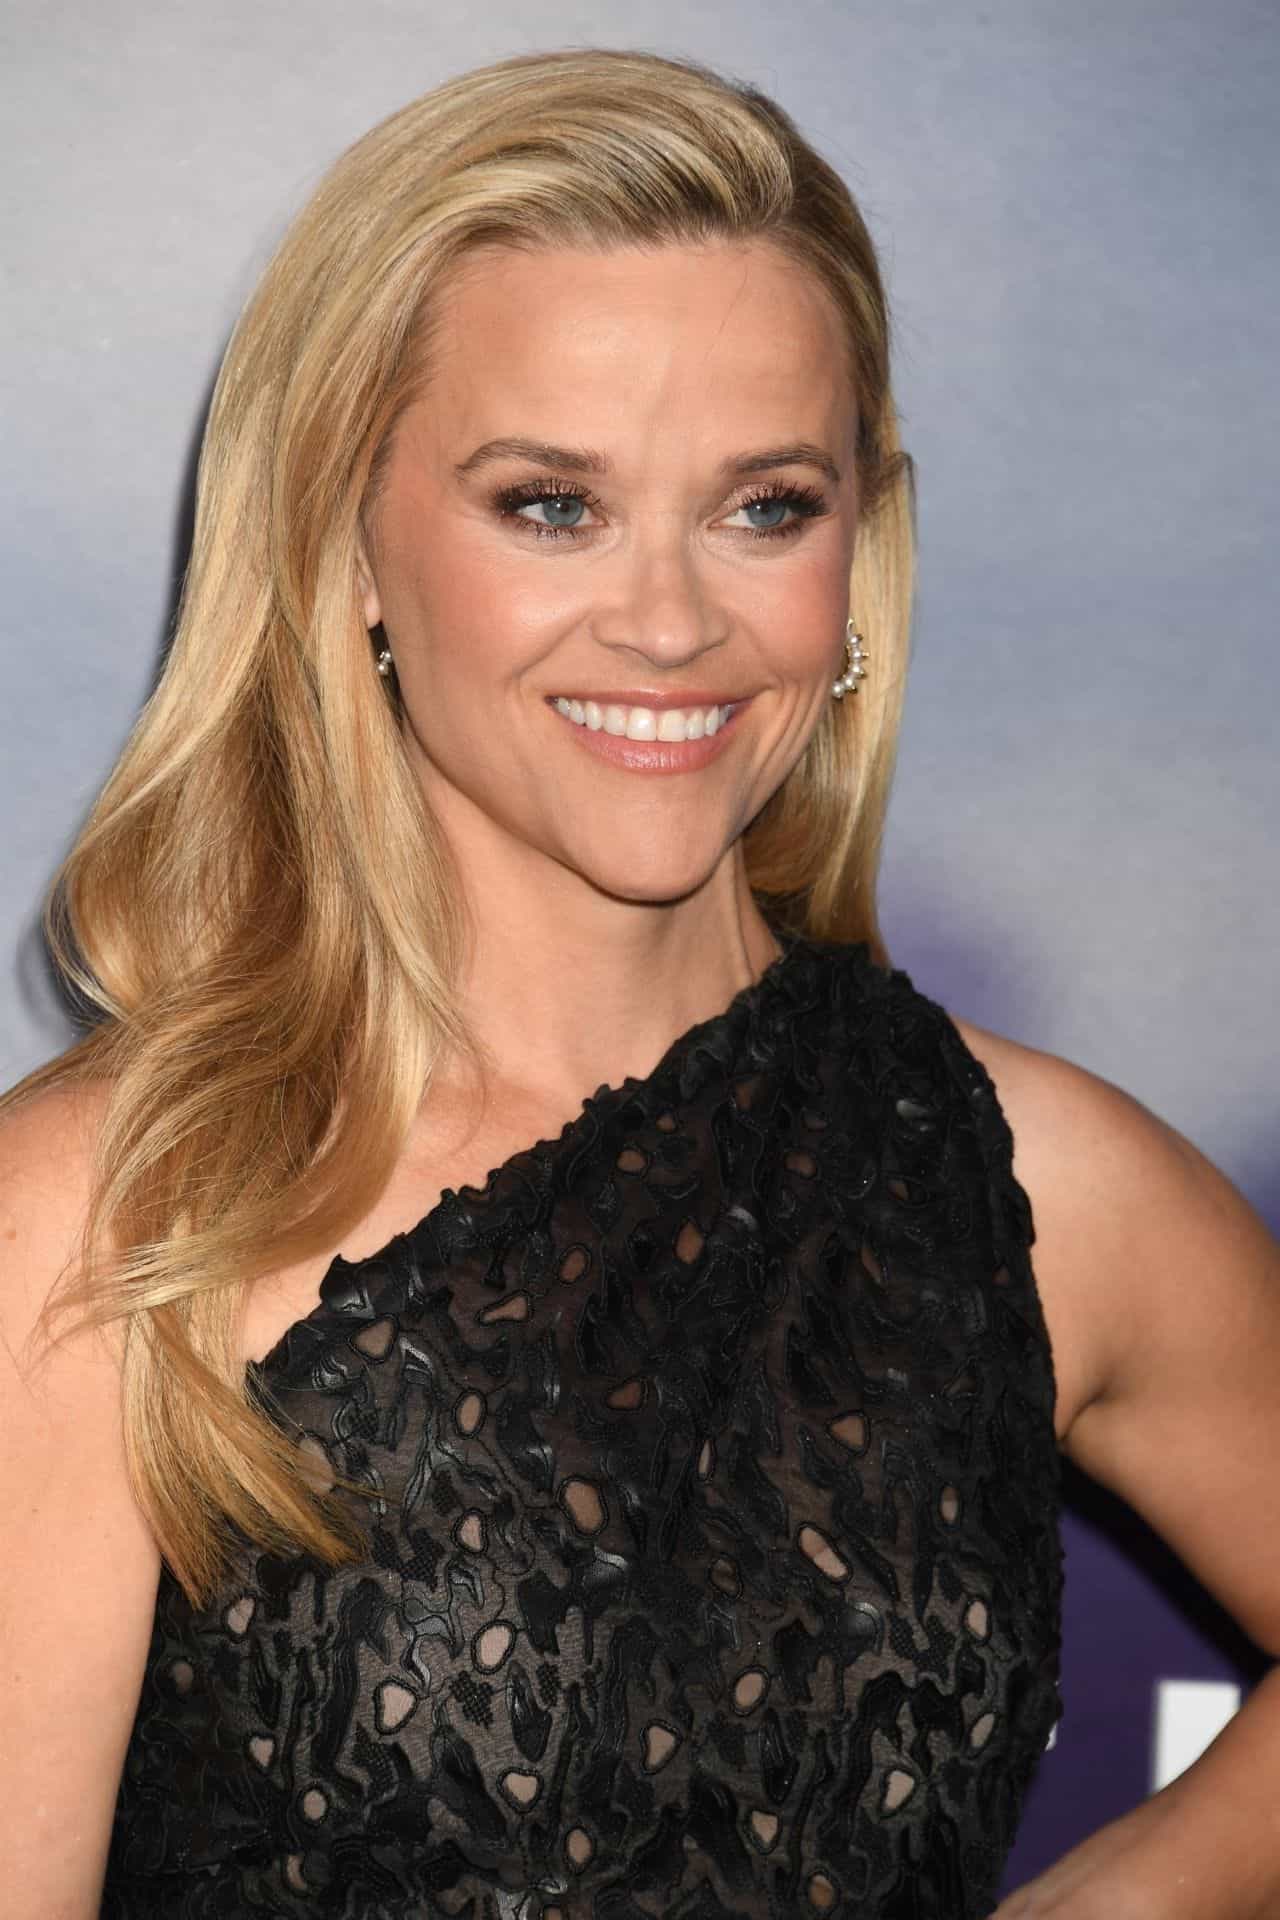 Reese Witherspoon Stole The Show at "The Last Thing He Told Me" Premiere